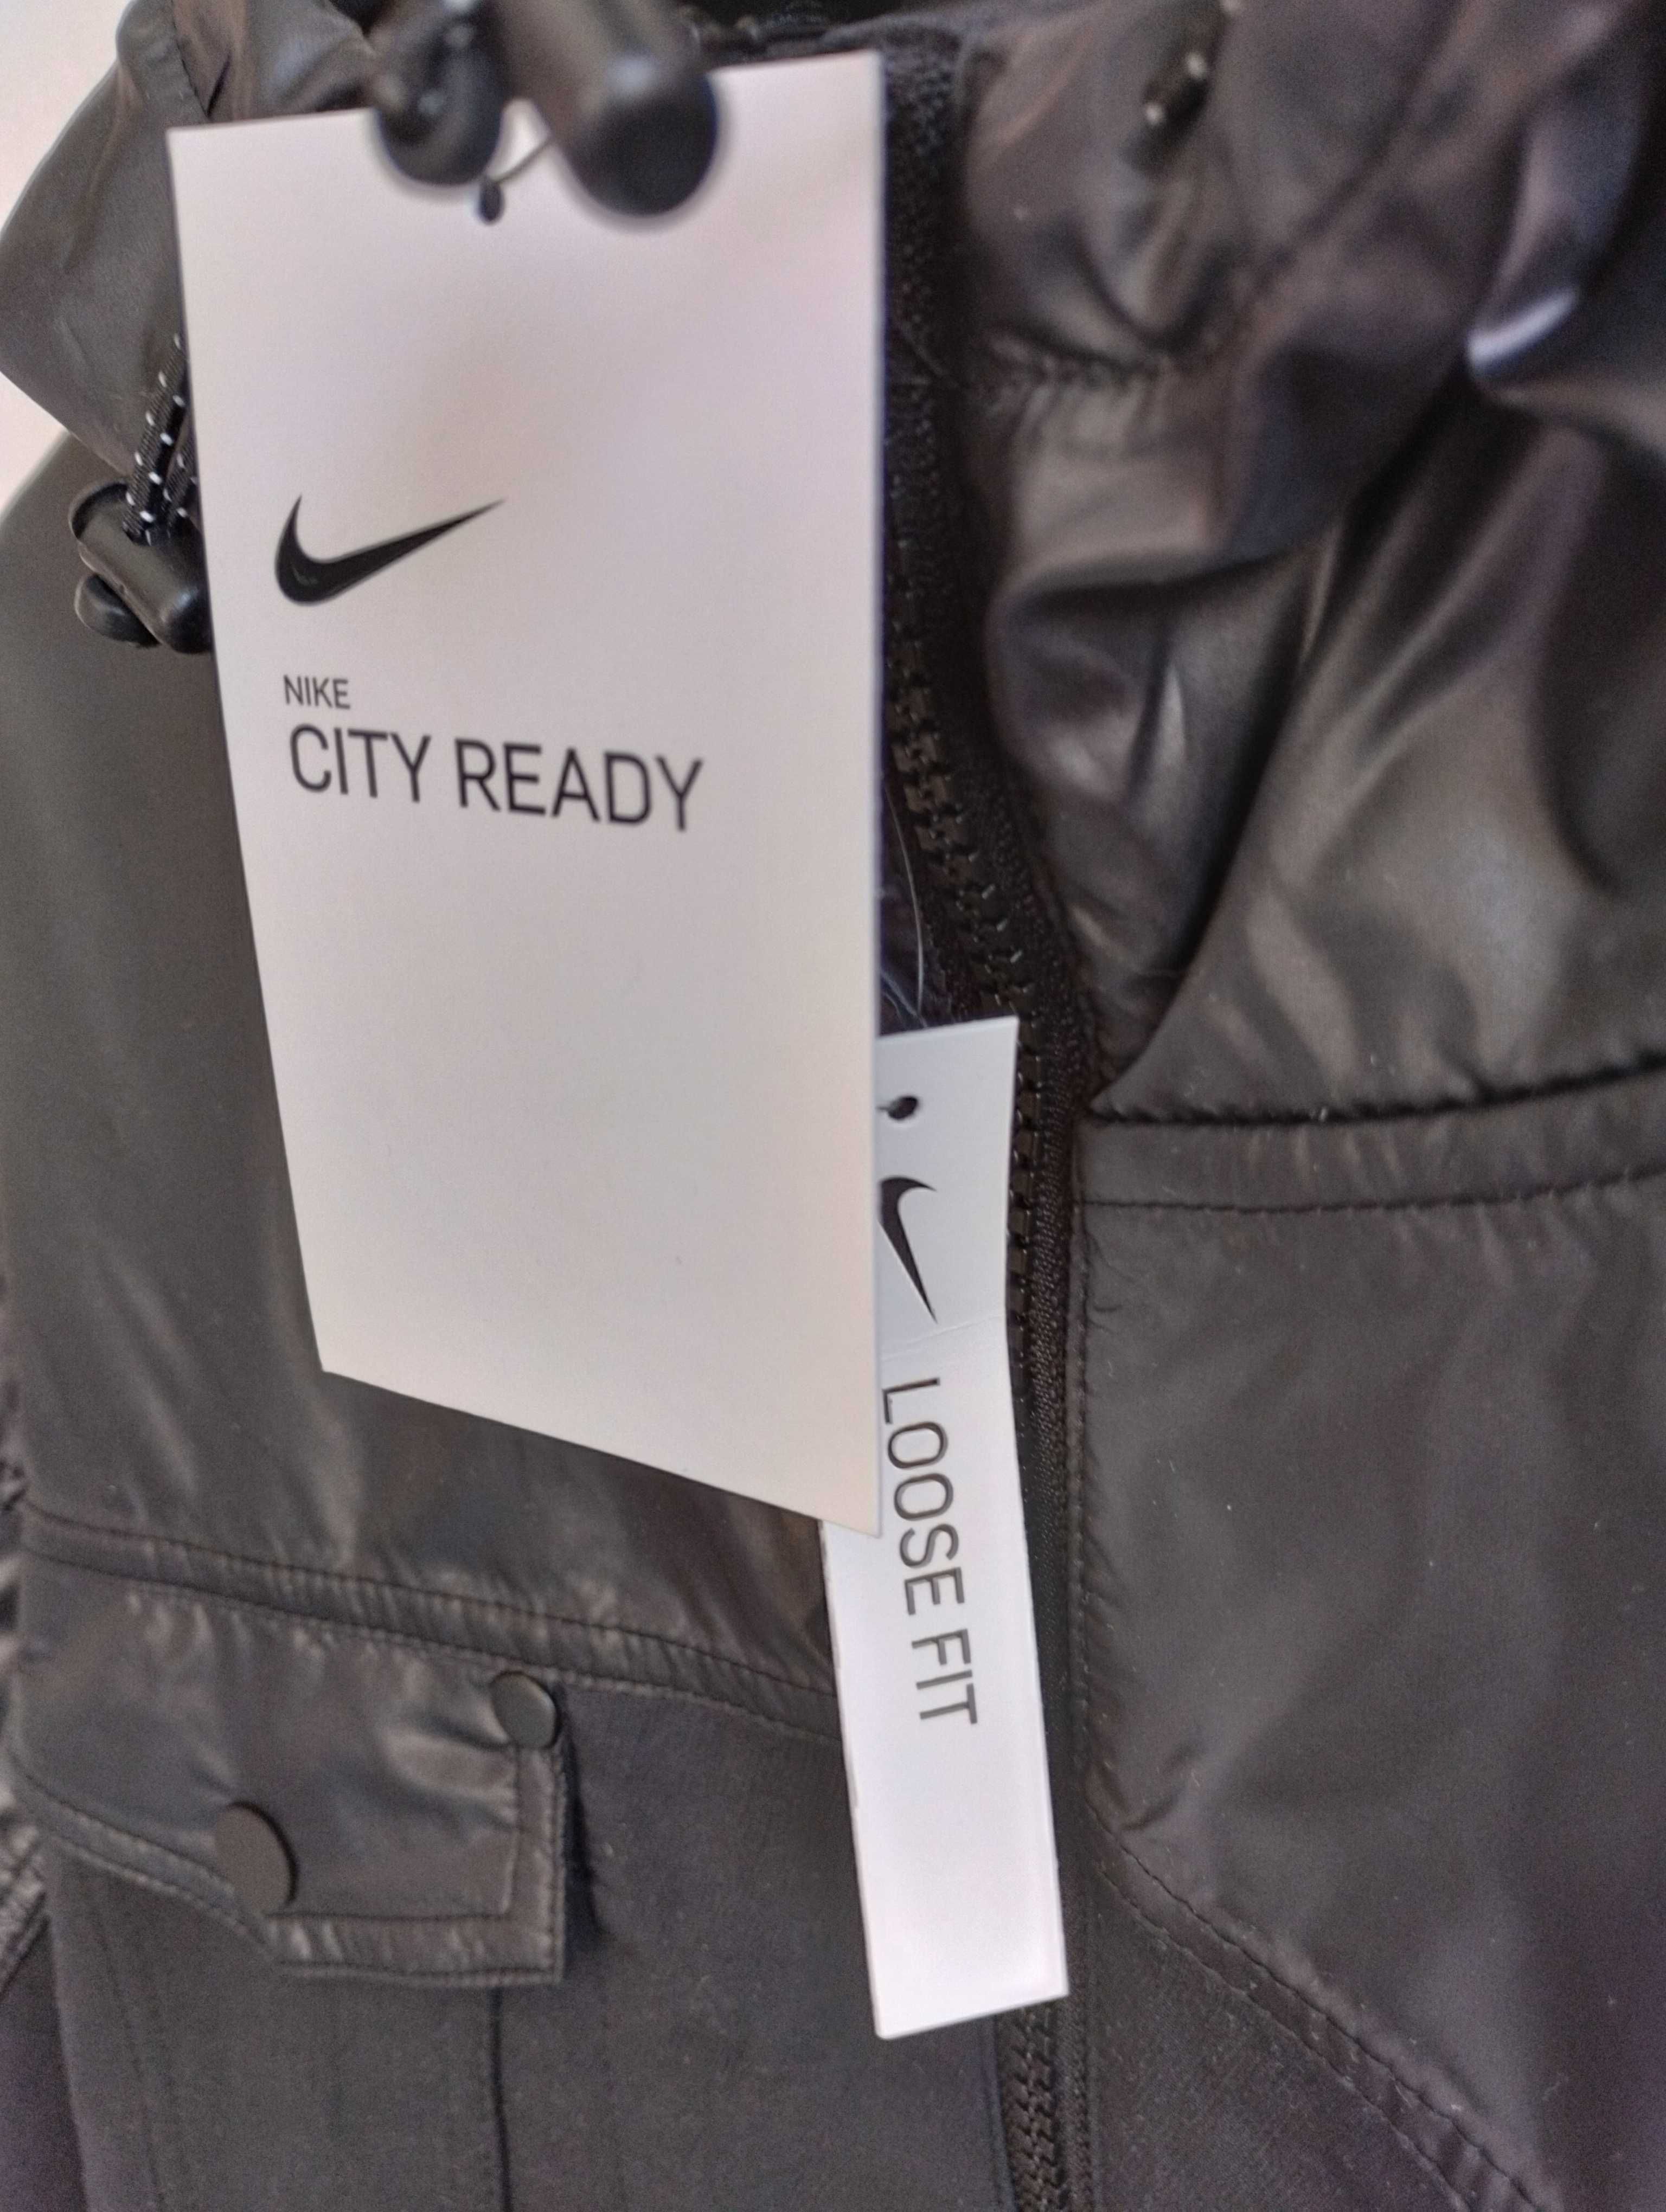 Nike Women’s City Ready Cropped Jacket размер M loose fit.